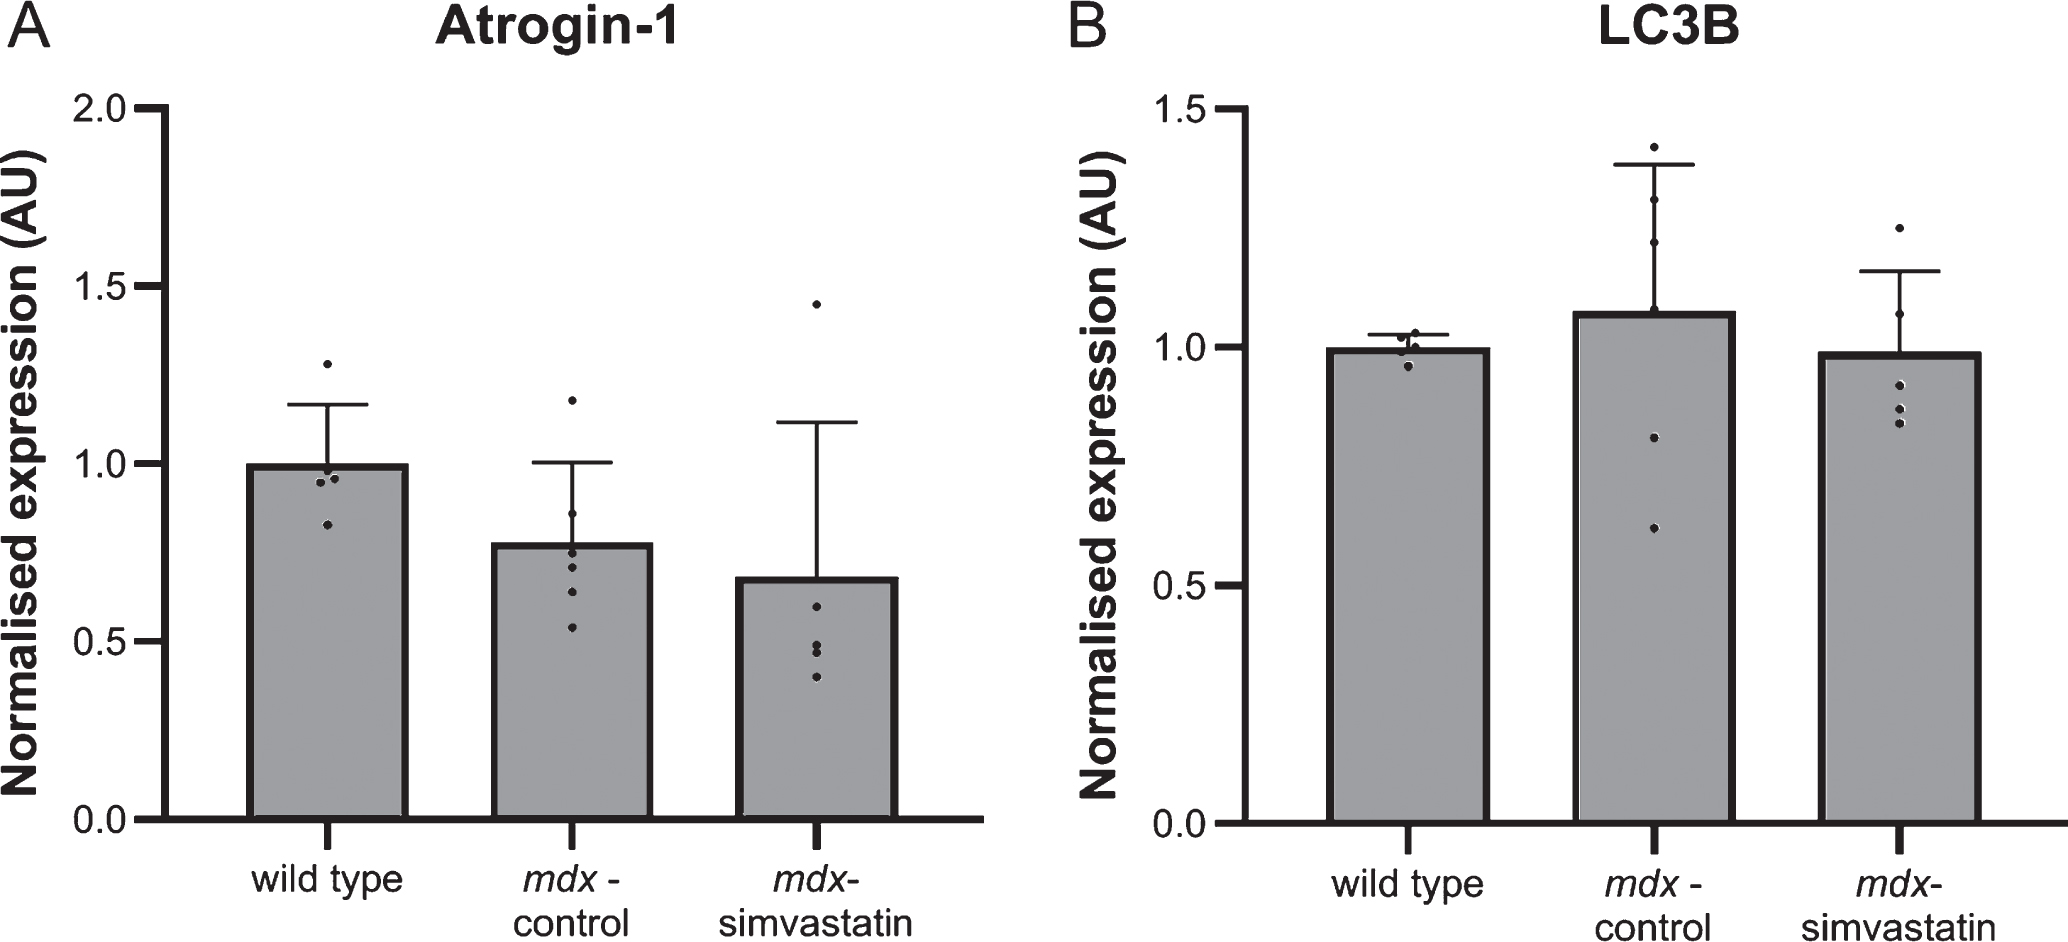 Autophagy. Expression of (A) atrogin–1 and (B) LC3B in the diaphragm of 16–week old mice after 12 weeks of simvastatin treatment (n = 5–6). There are no significant differences between any of the groups.